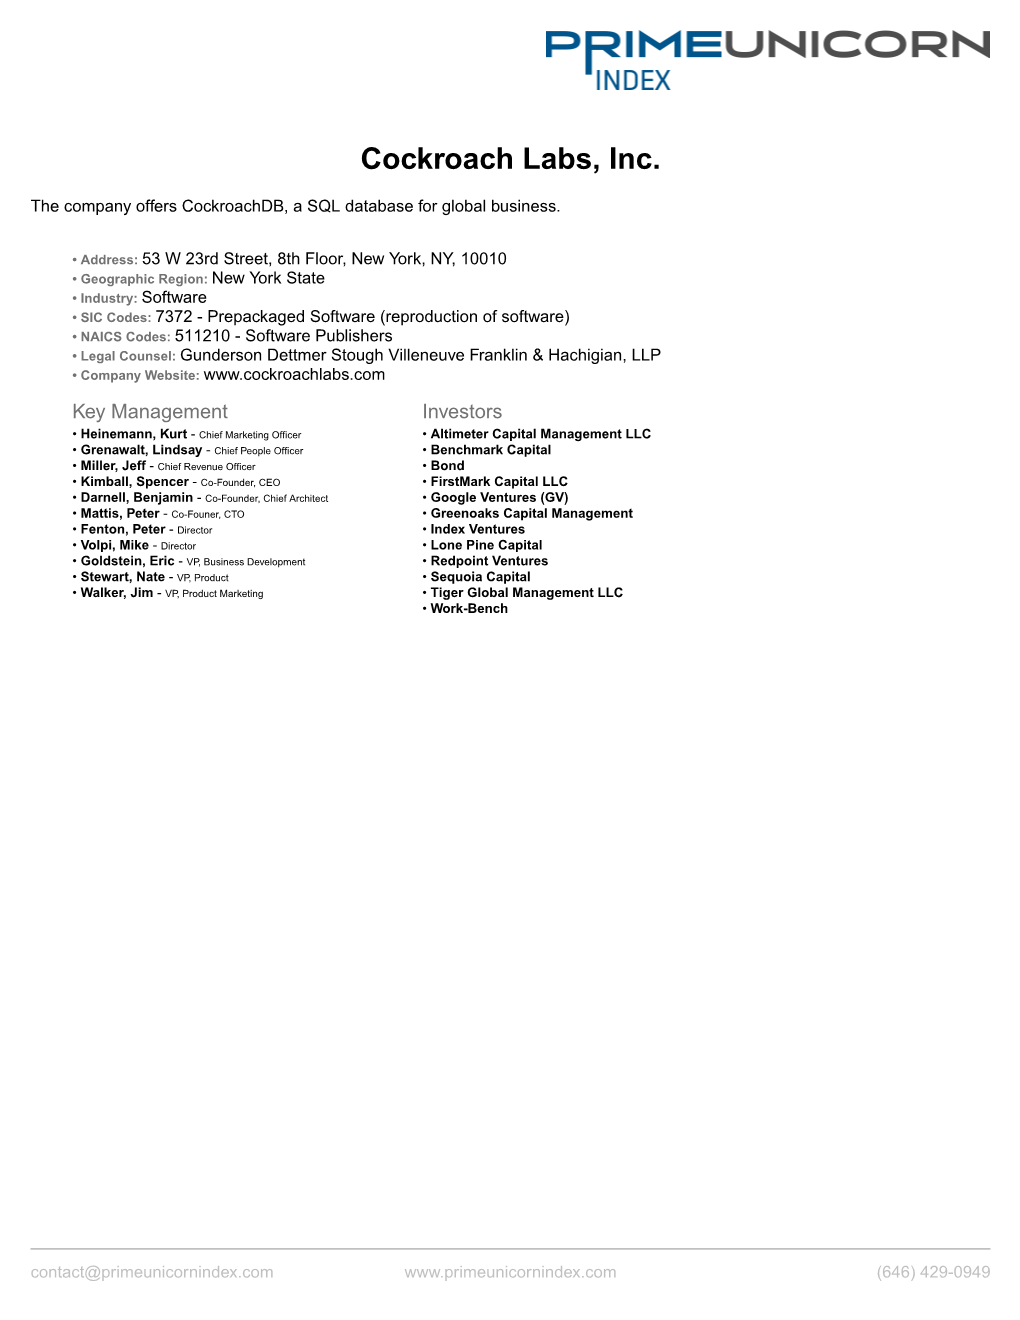 Cockroach Labs, Inc